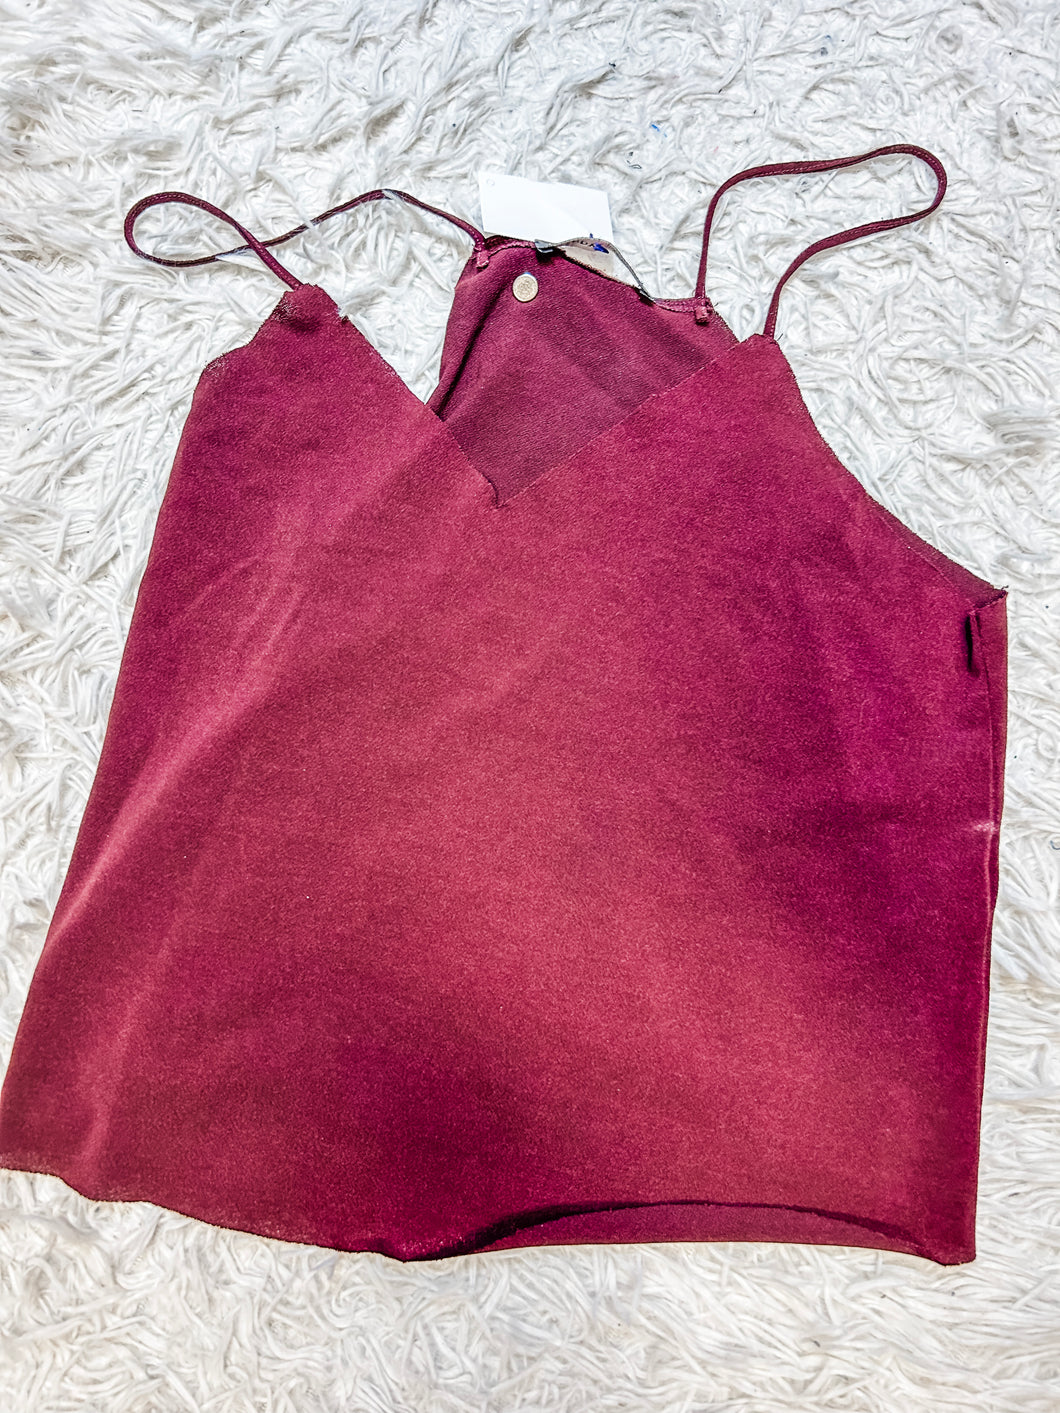 Brandy Melville Tank Top Size Small *